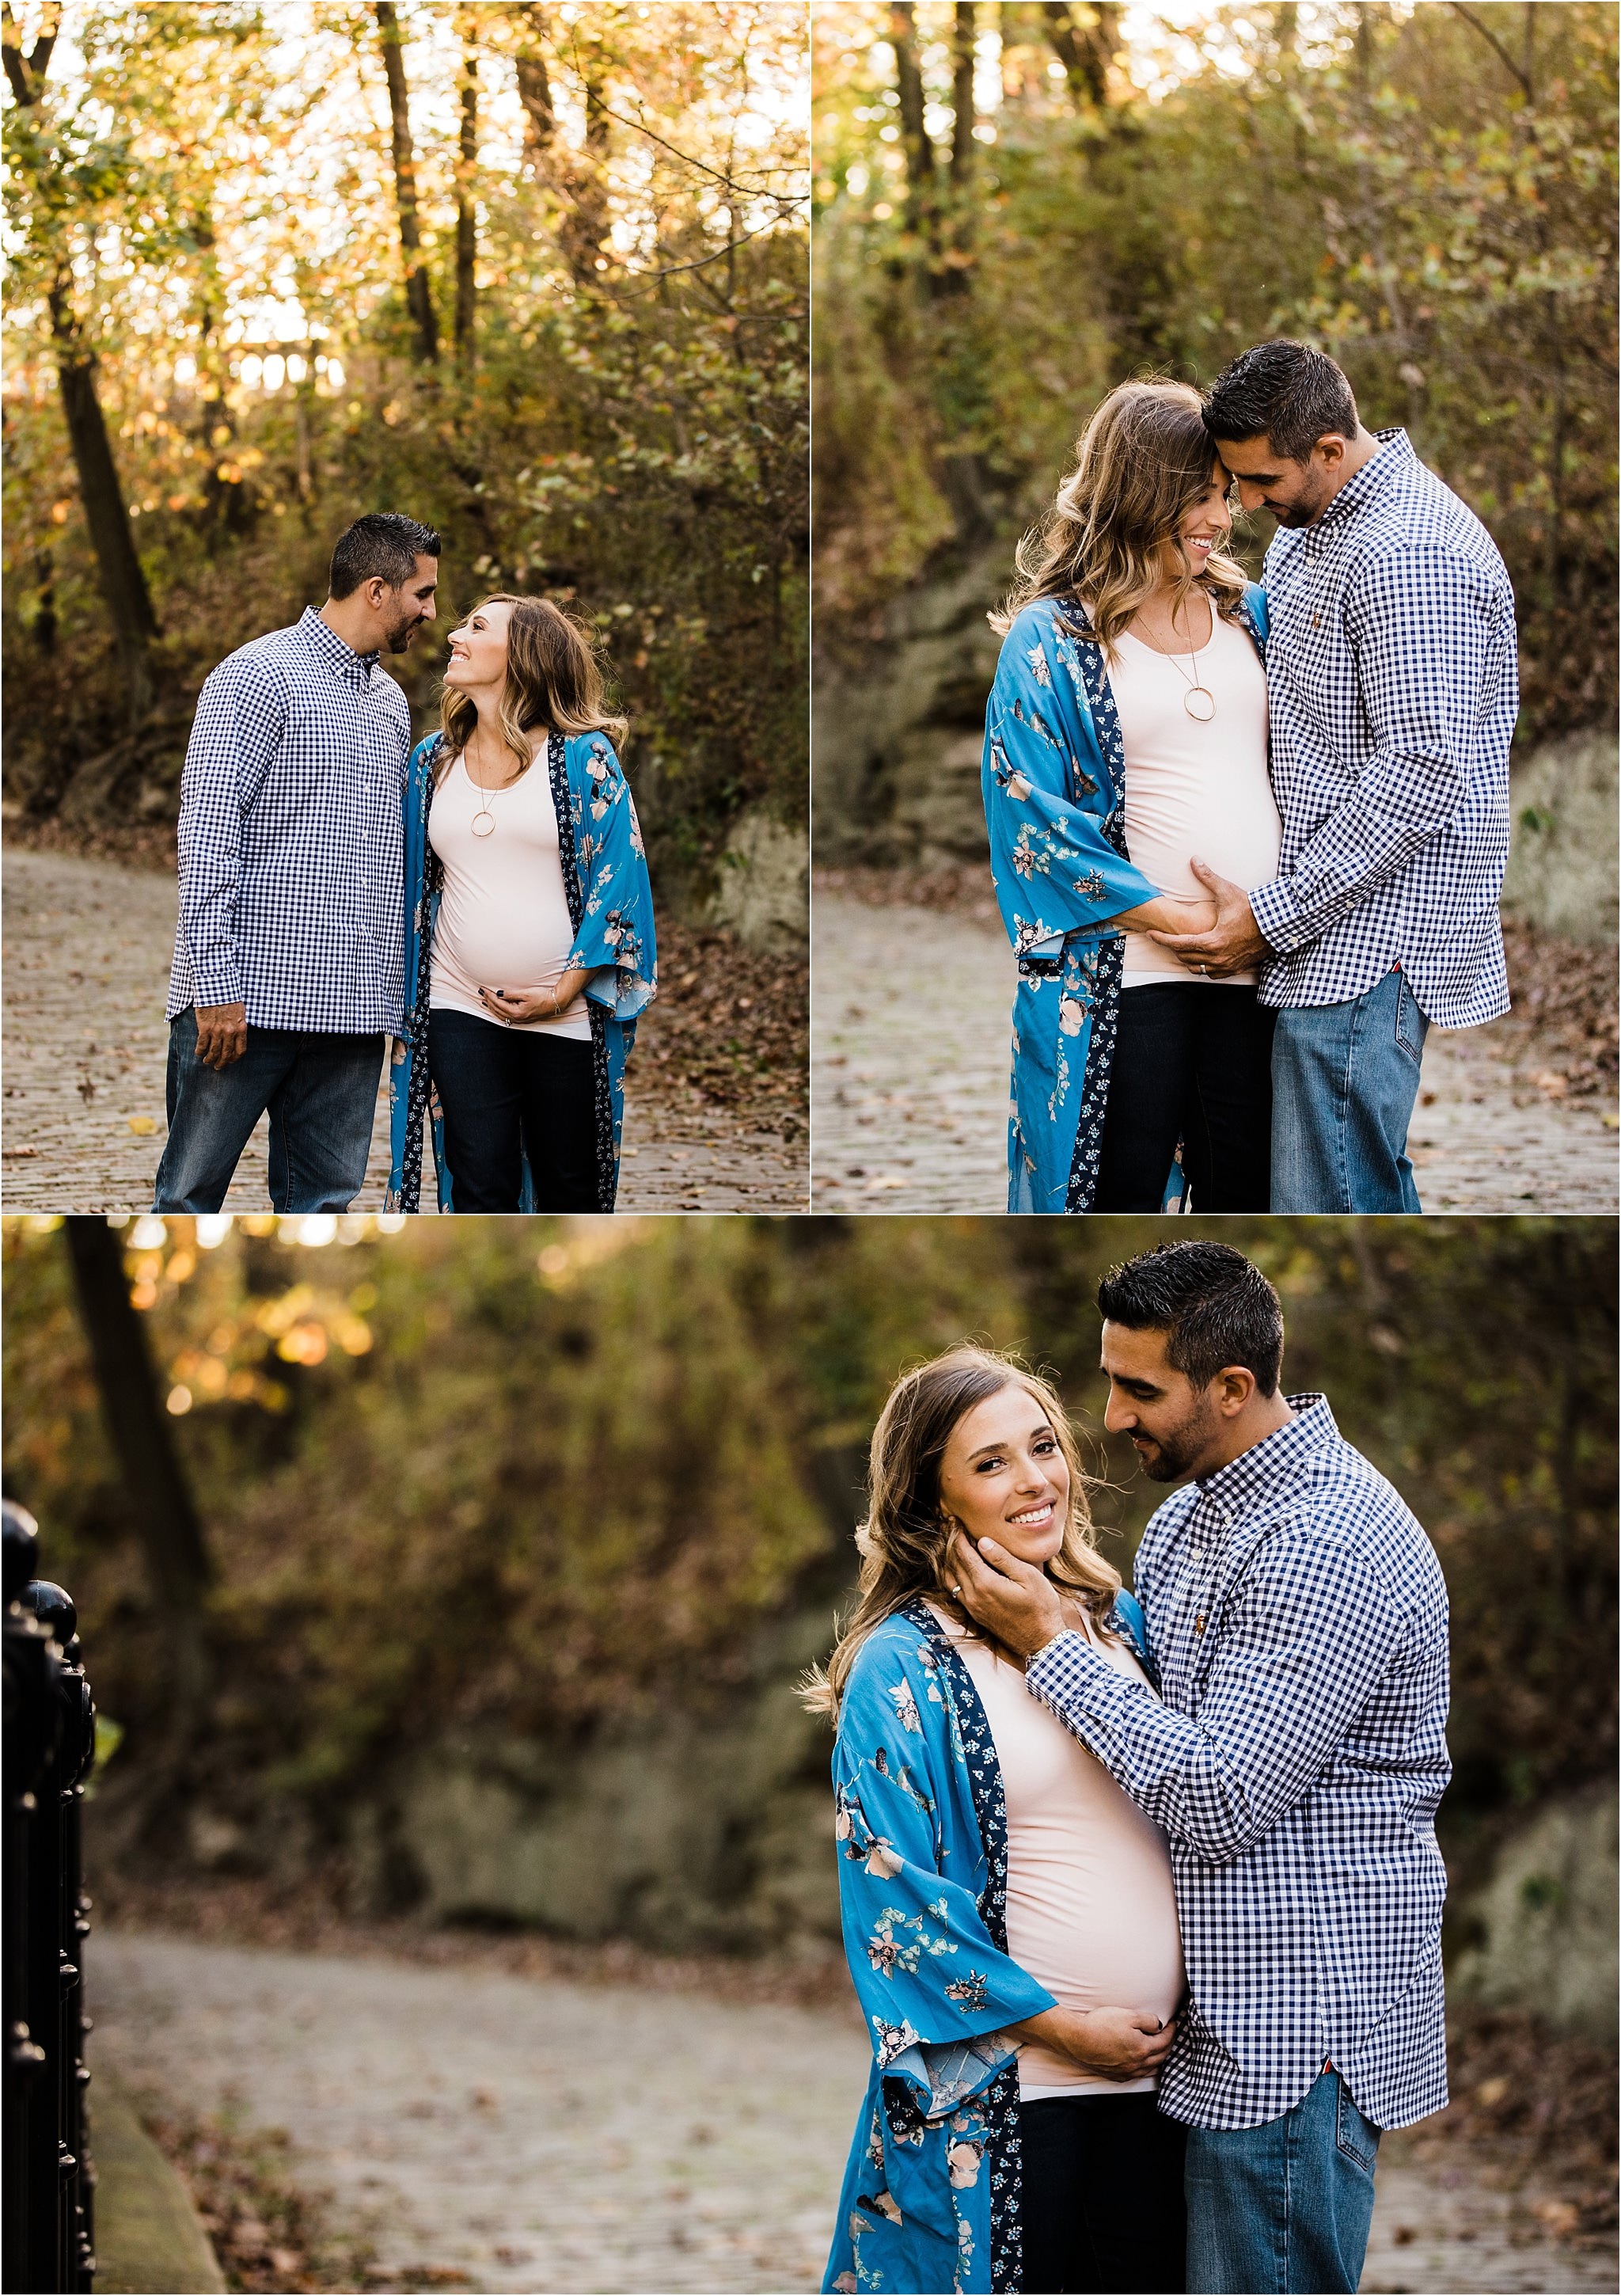 Expecting parents in love at Schenley Park Pittsburgh